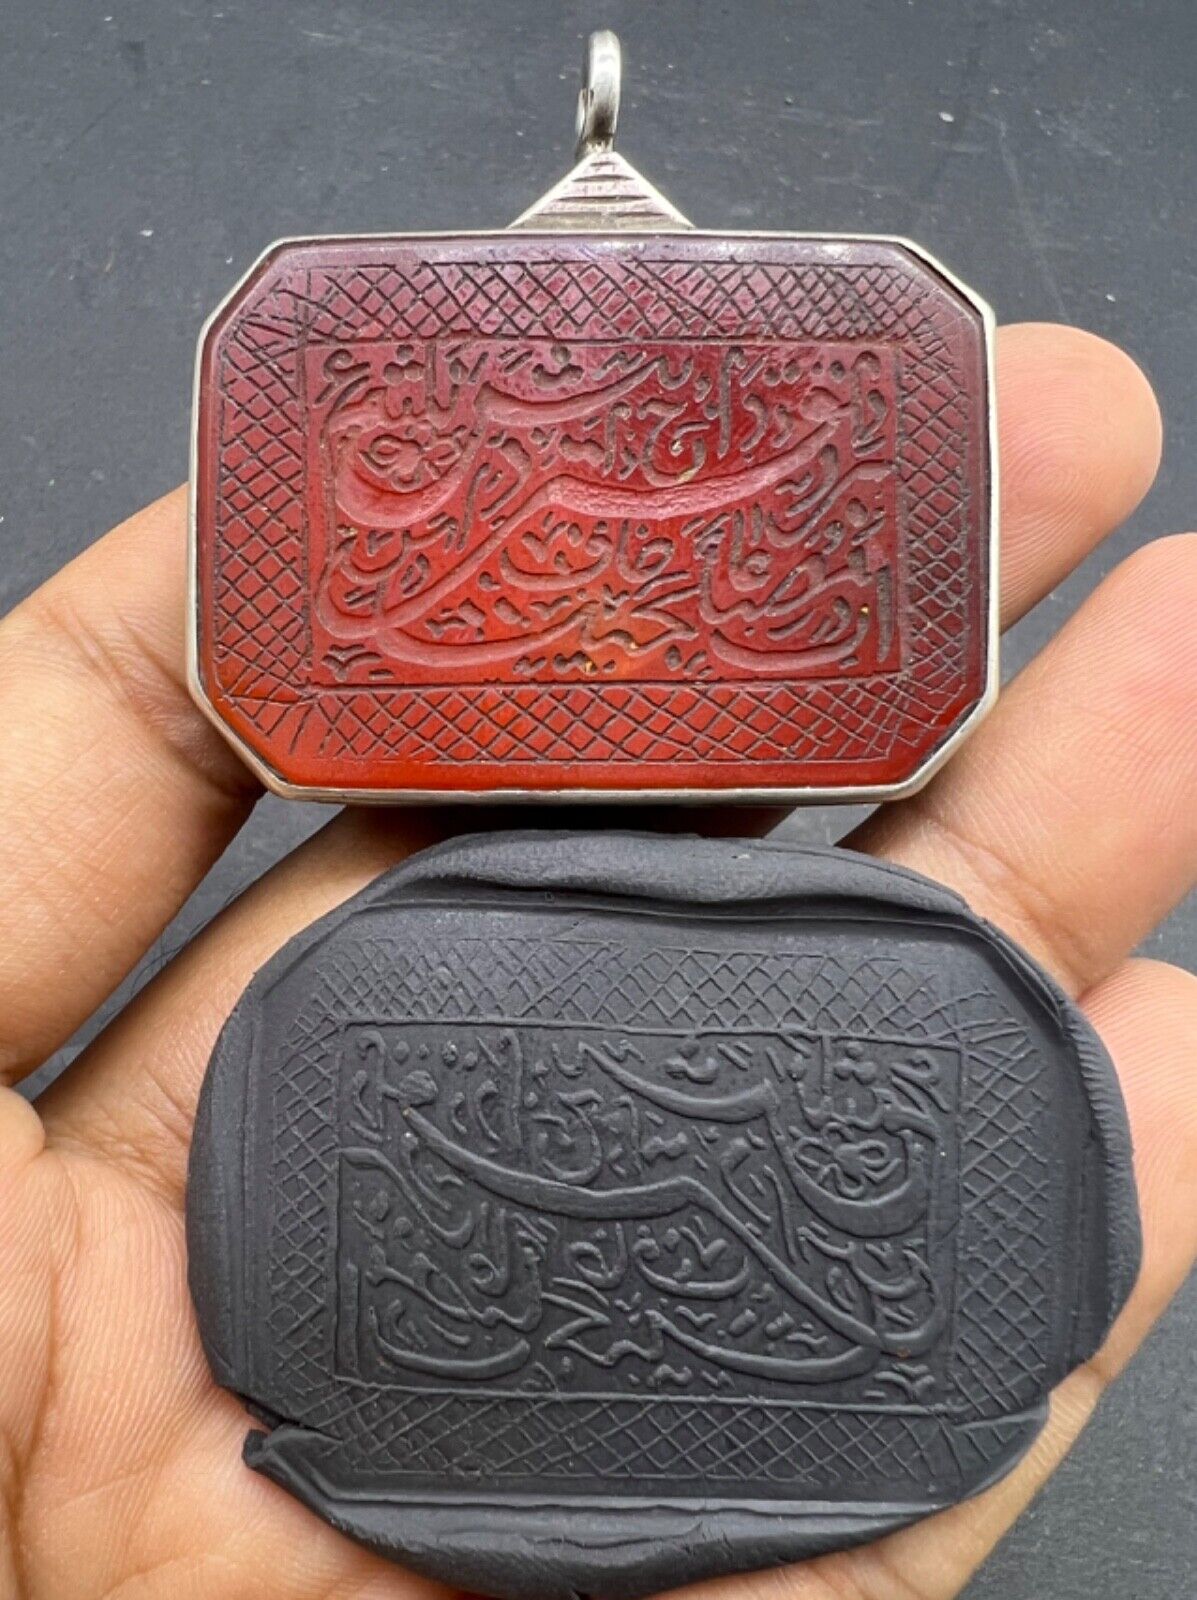 Central Asian Jewelries Rare Old Carnelian Agate With Islamic Calligraphy Amulet